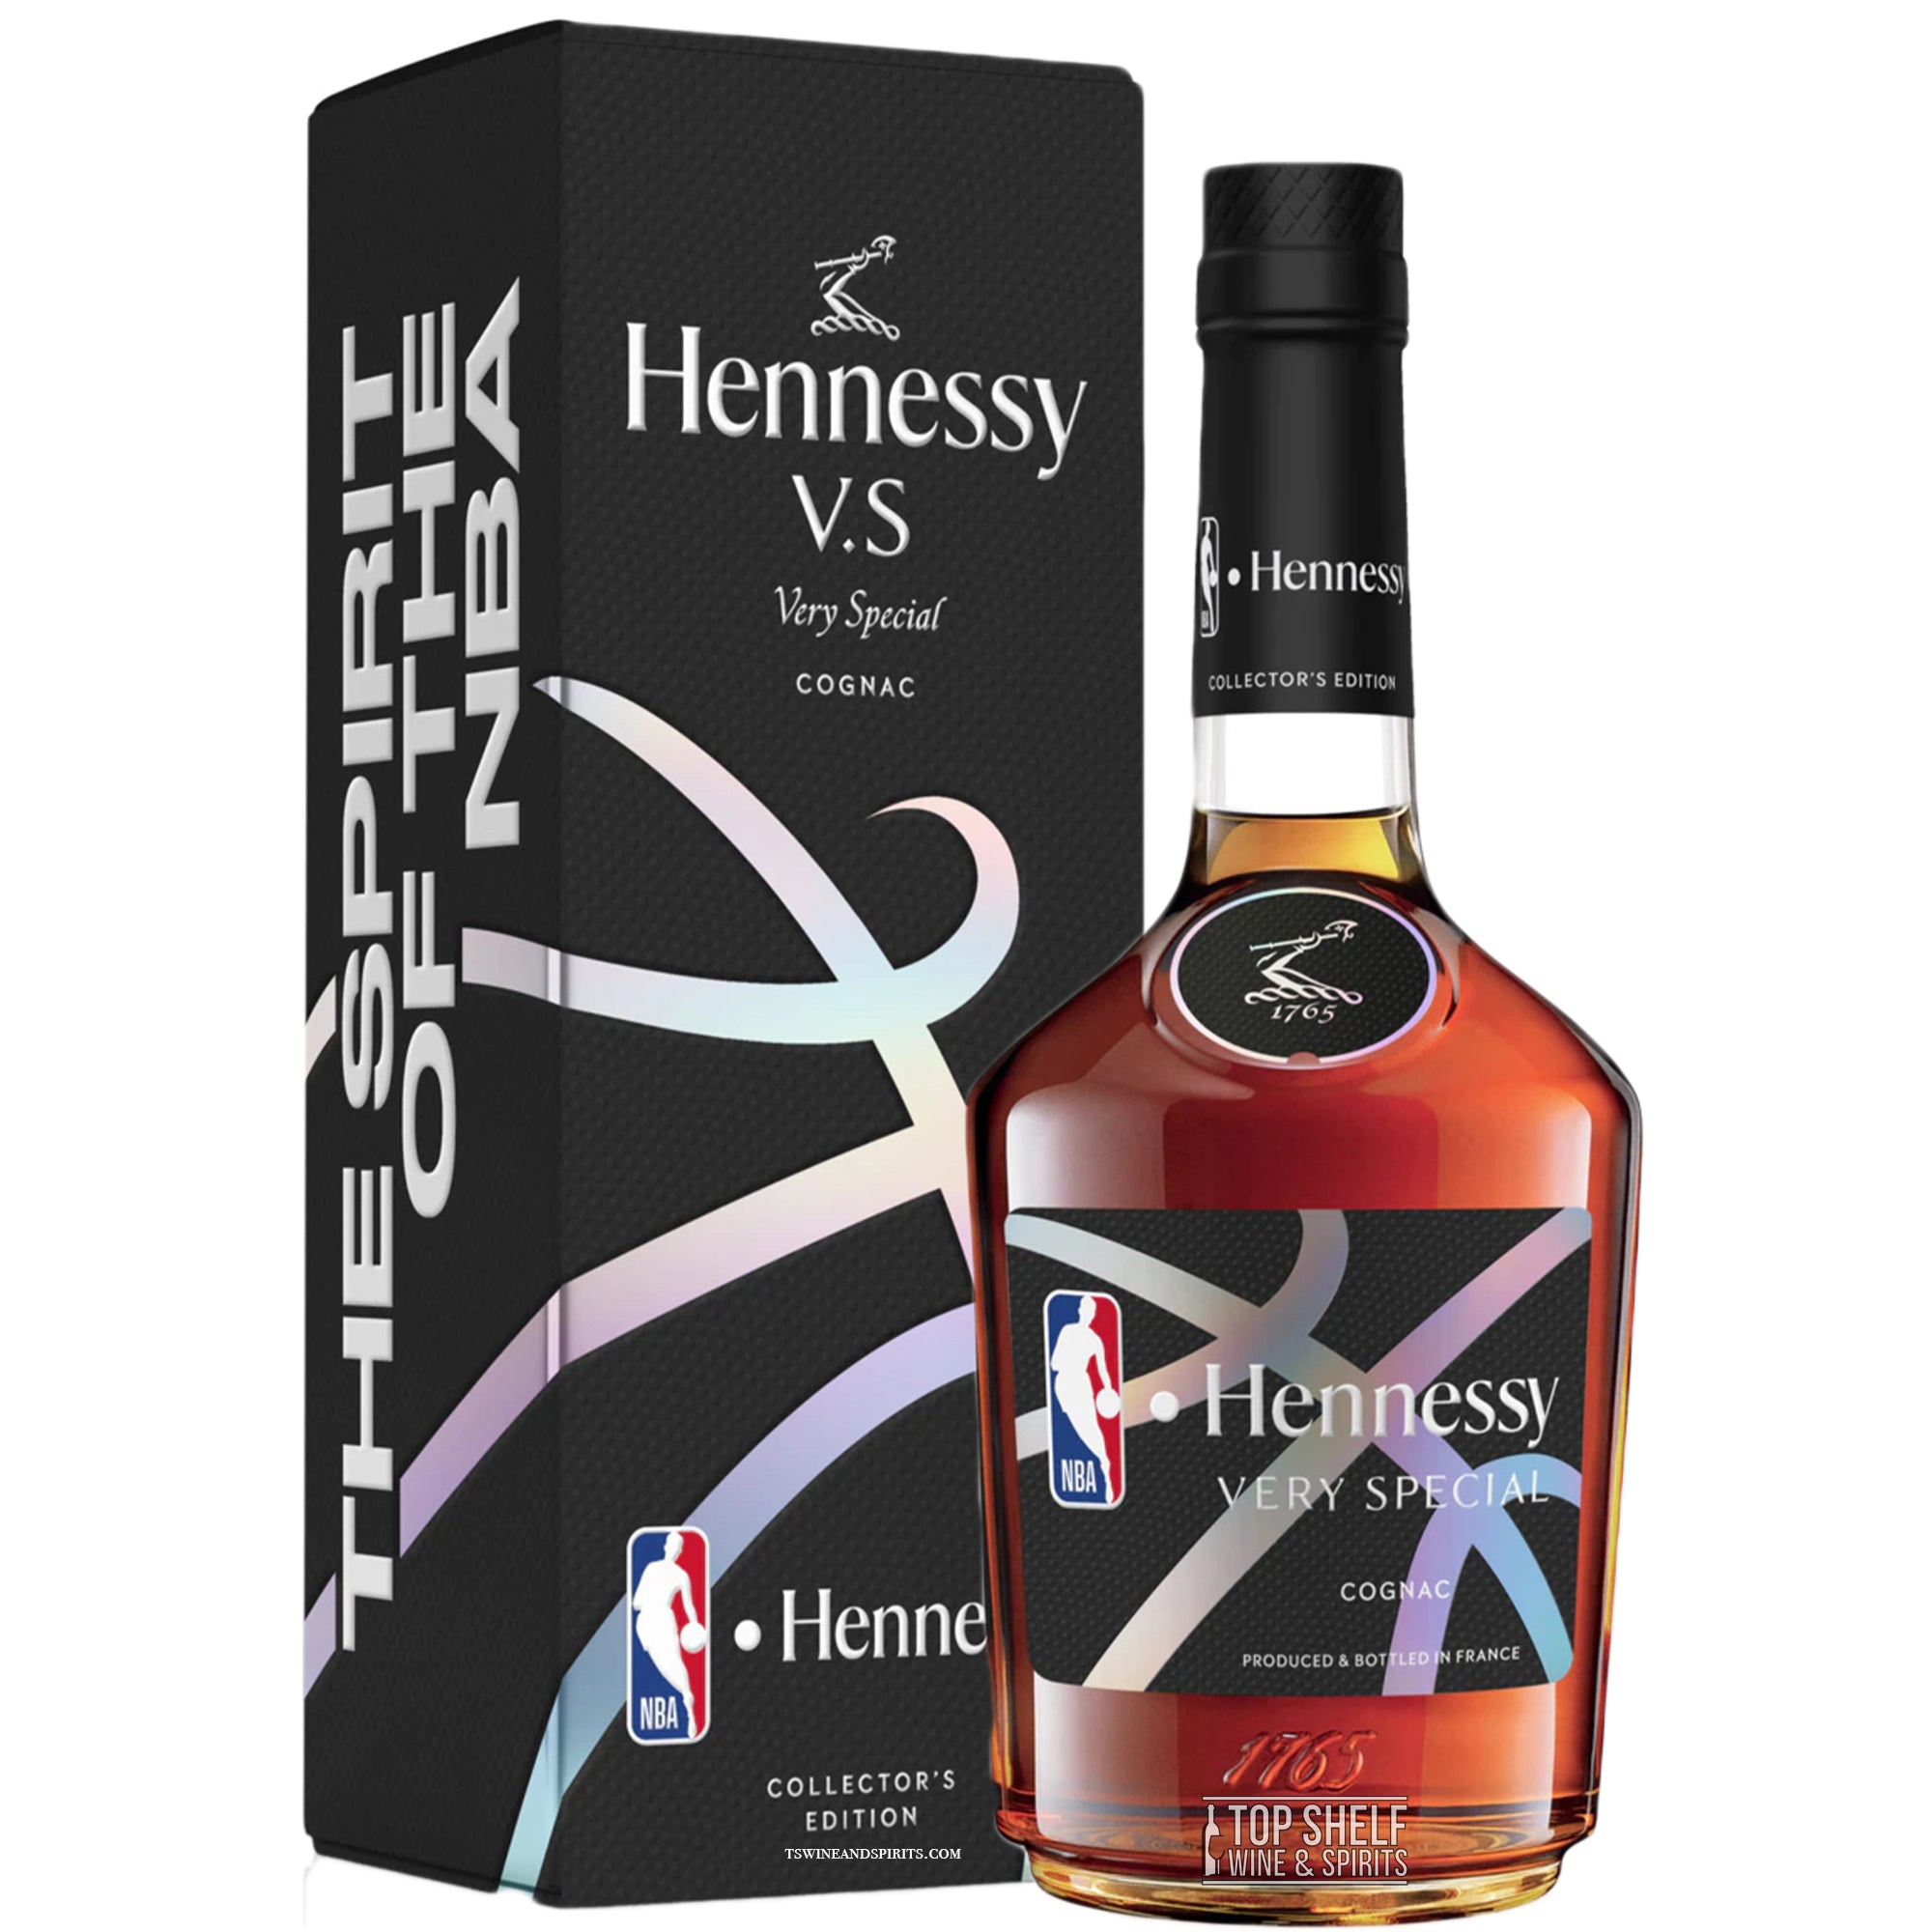 Hennessy Very Special Cognac France, 1.75 L - Party On Demand